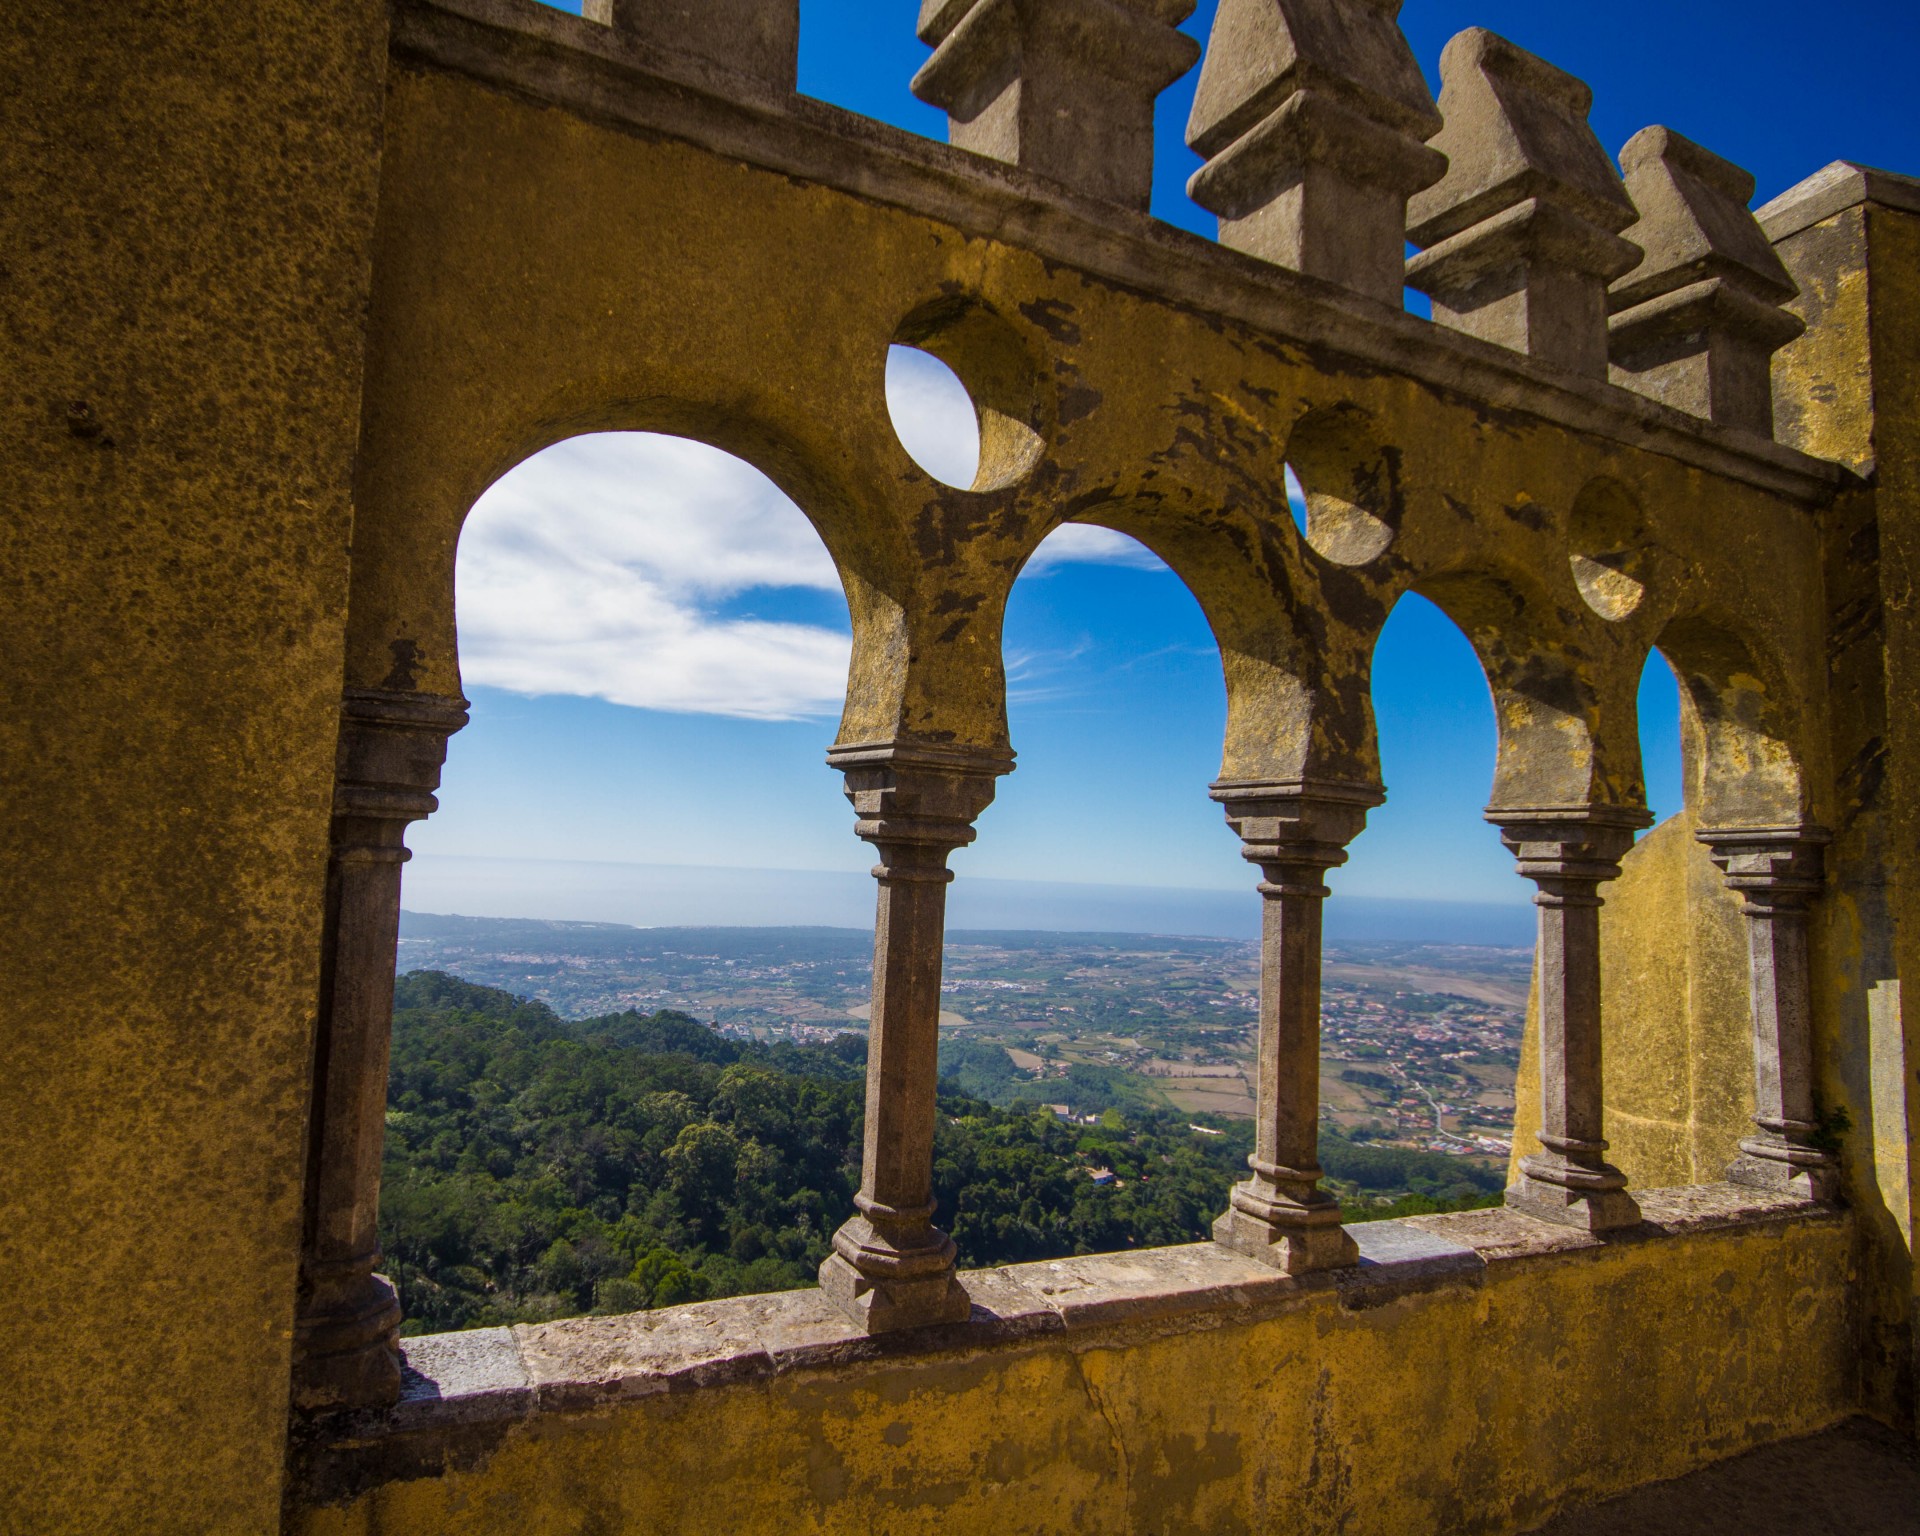 Looking out over Sintra, Portugal and it's surrounding lush forests from the detailed ramparts of Pena Palace